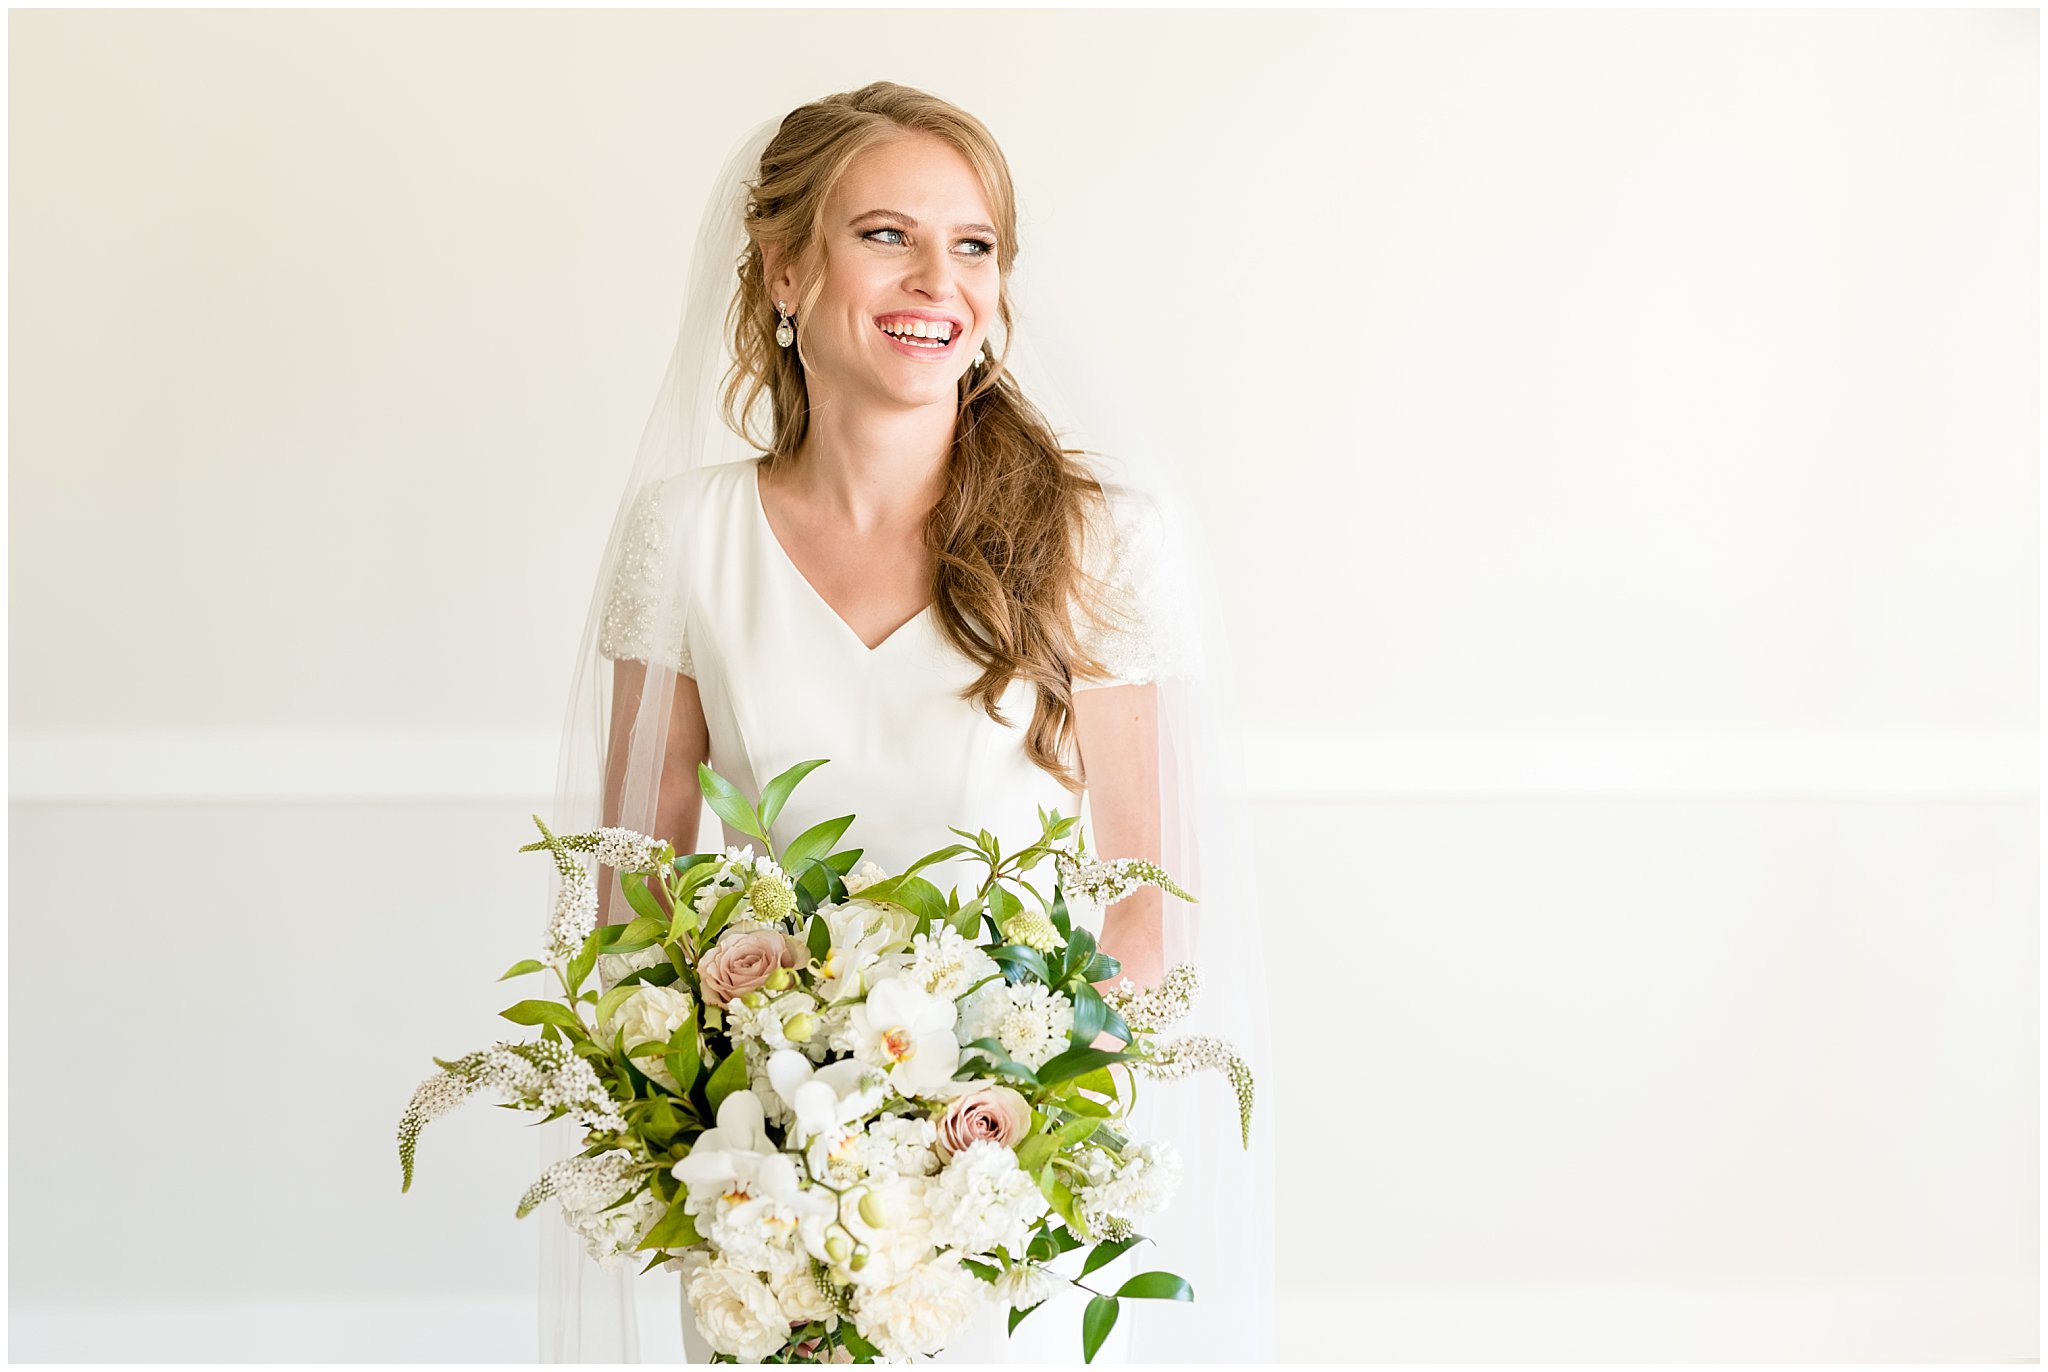 Bright and joyful laughing bridal shot with bouquet | Talia Event Center